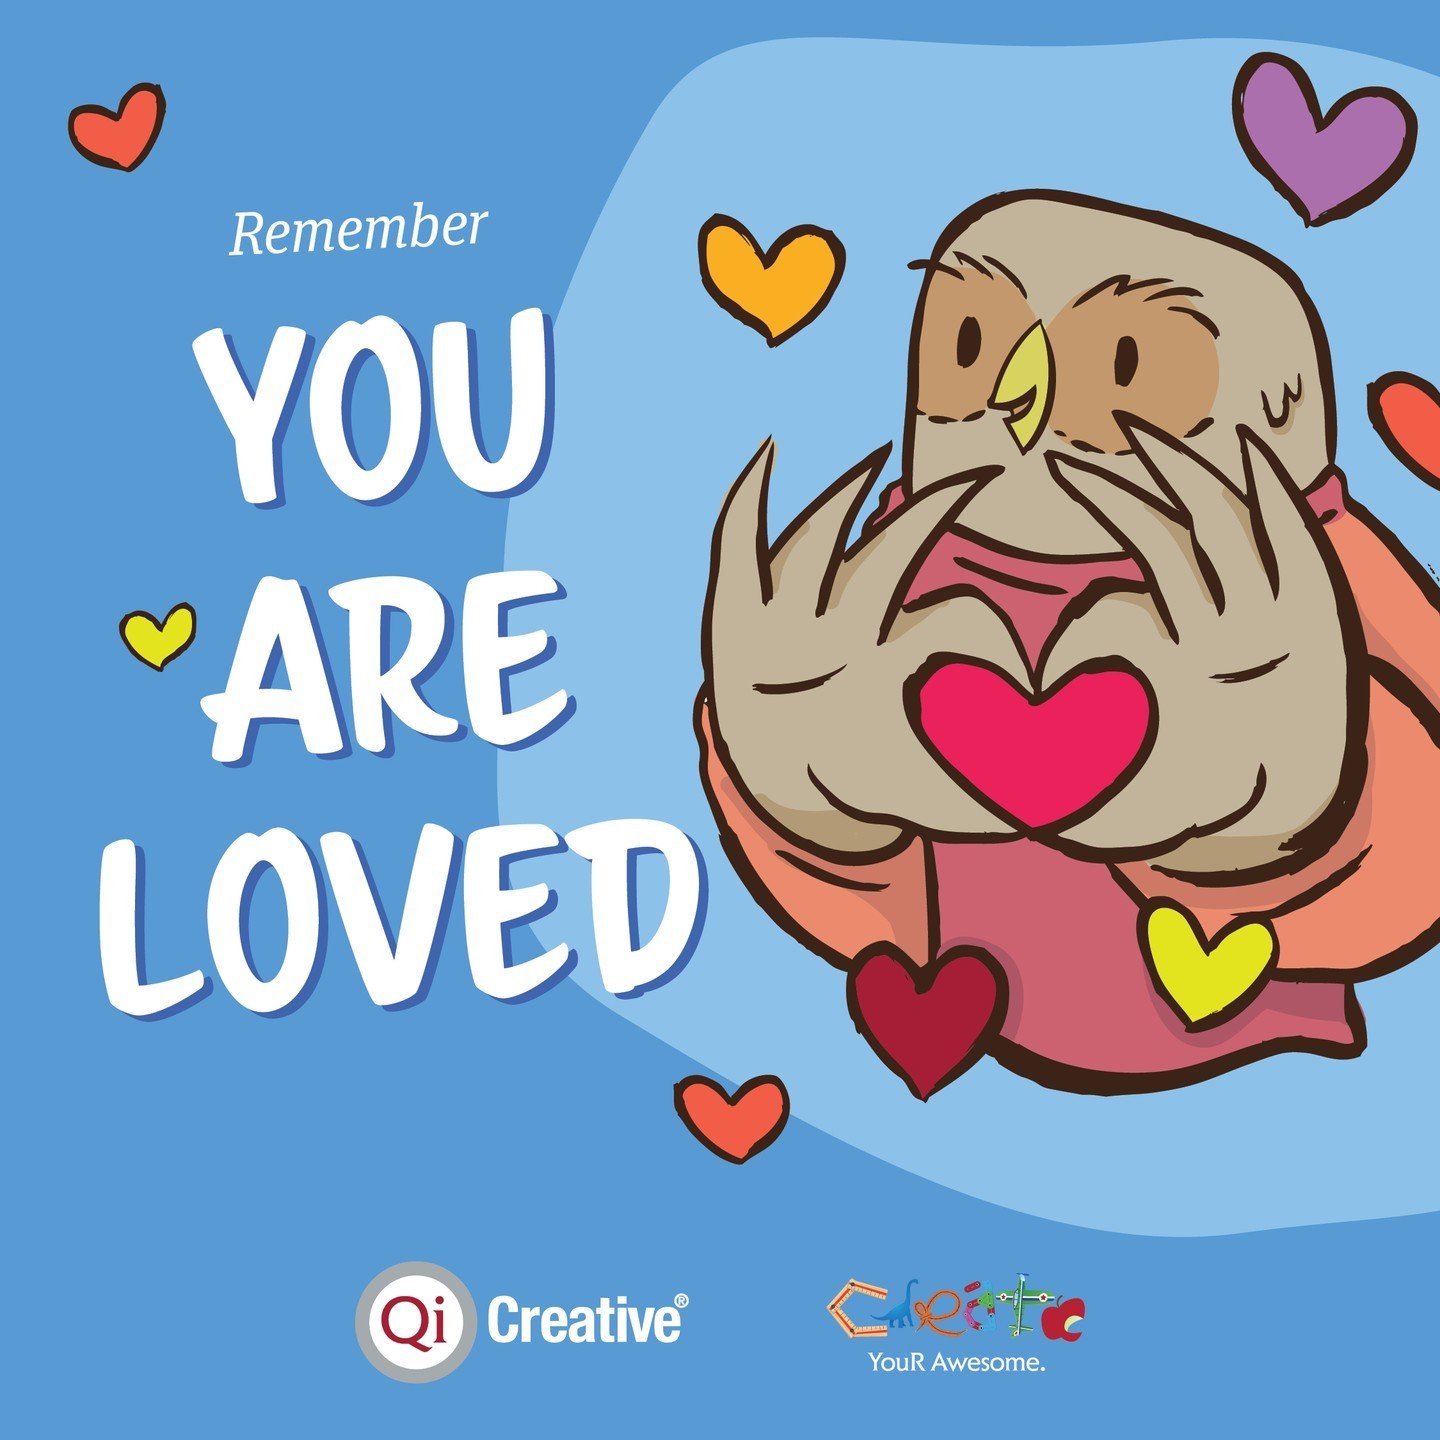 Just a little reminder for #MentalHealthWeek: You are LOVED 💓 No matter where you're from, what you've done, or how your day has been, know that you are appreciated and that you are worth celebrating 😍💕

#CreateYouRAwesome #QiWallOfAwesome #Occupa